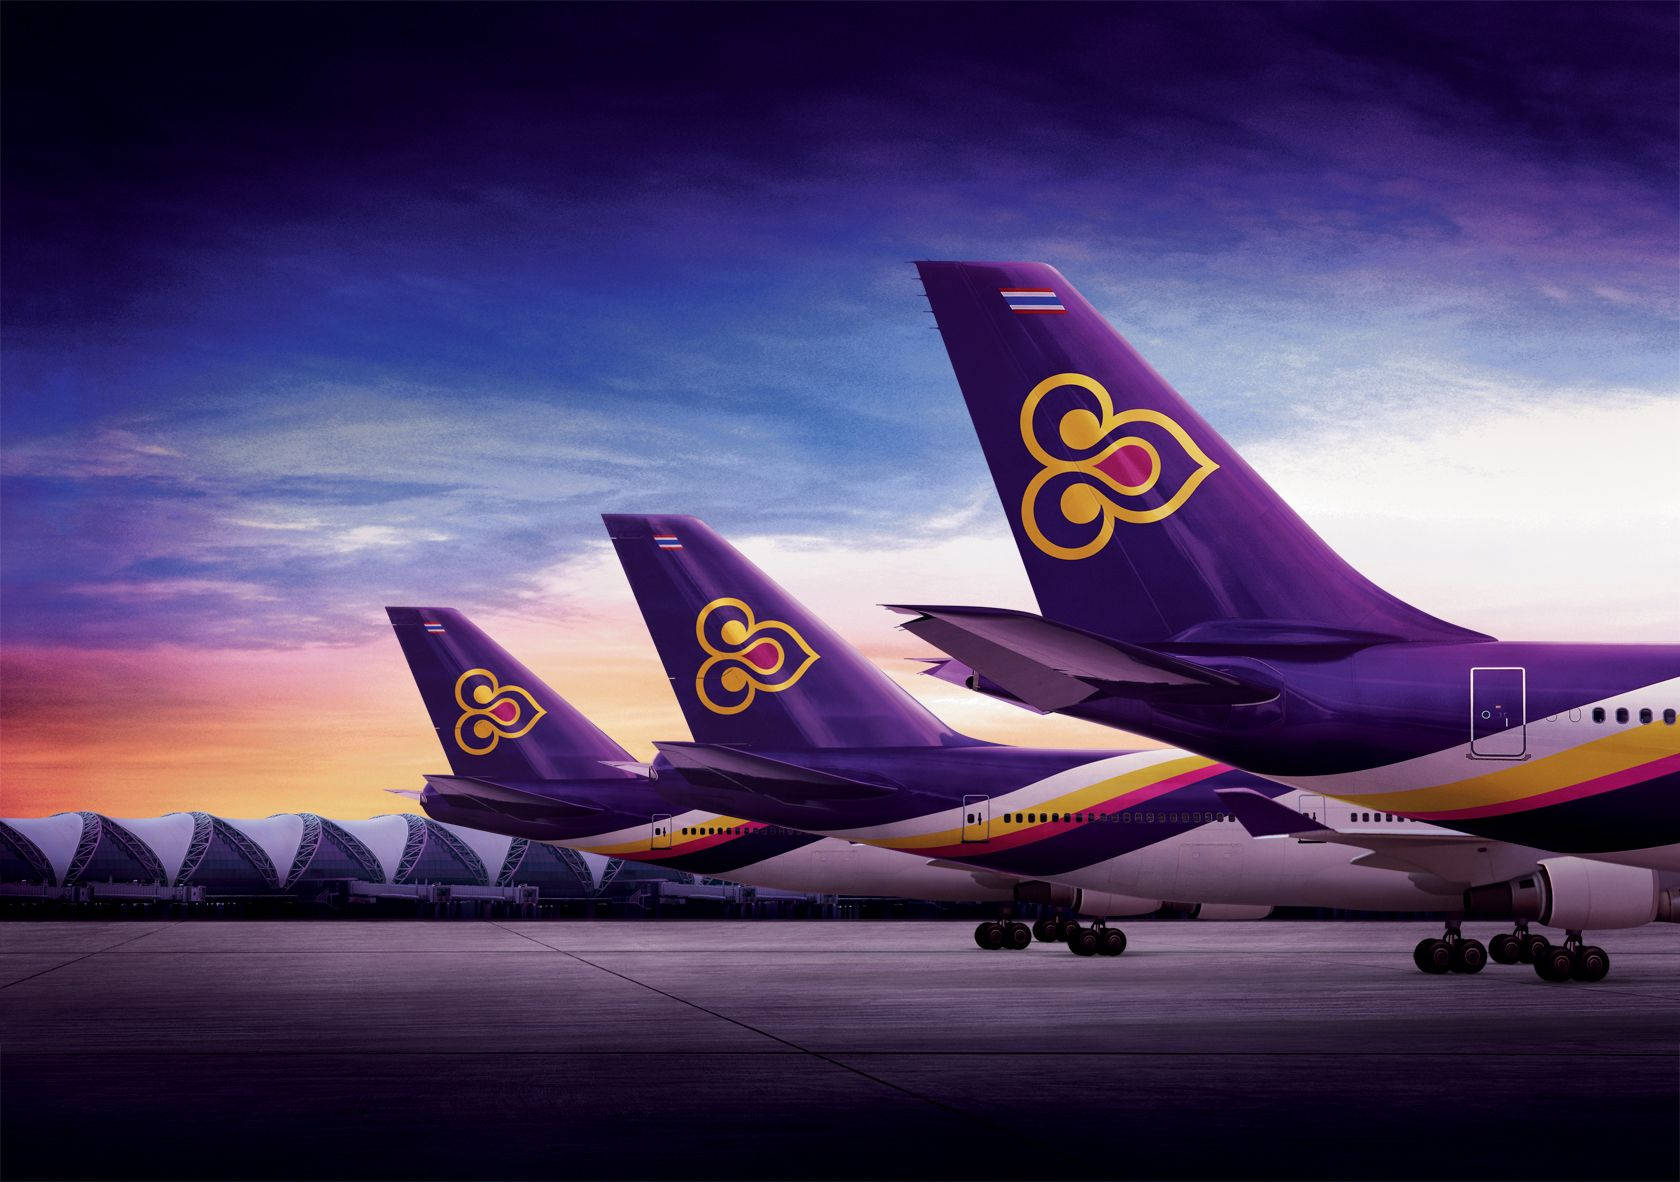 Thaiairways Lila Flygplan. (this Is The Literal Translation. However, If Referring To A Computer Or Mobile Wallpaper, One Might Say 